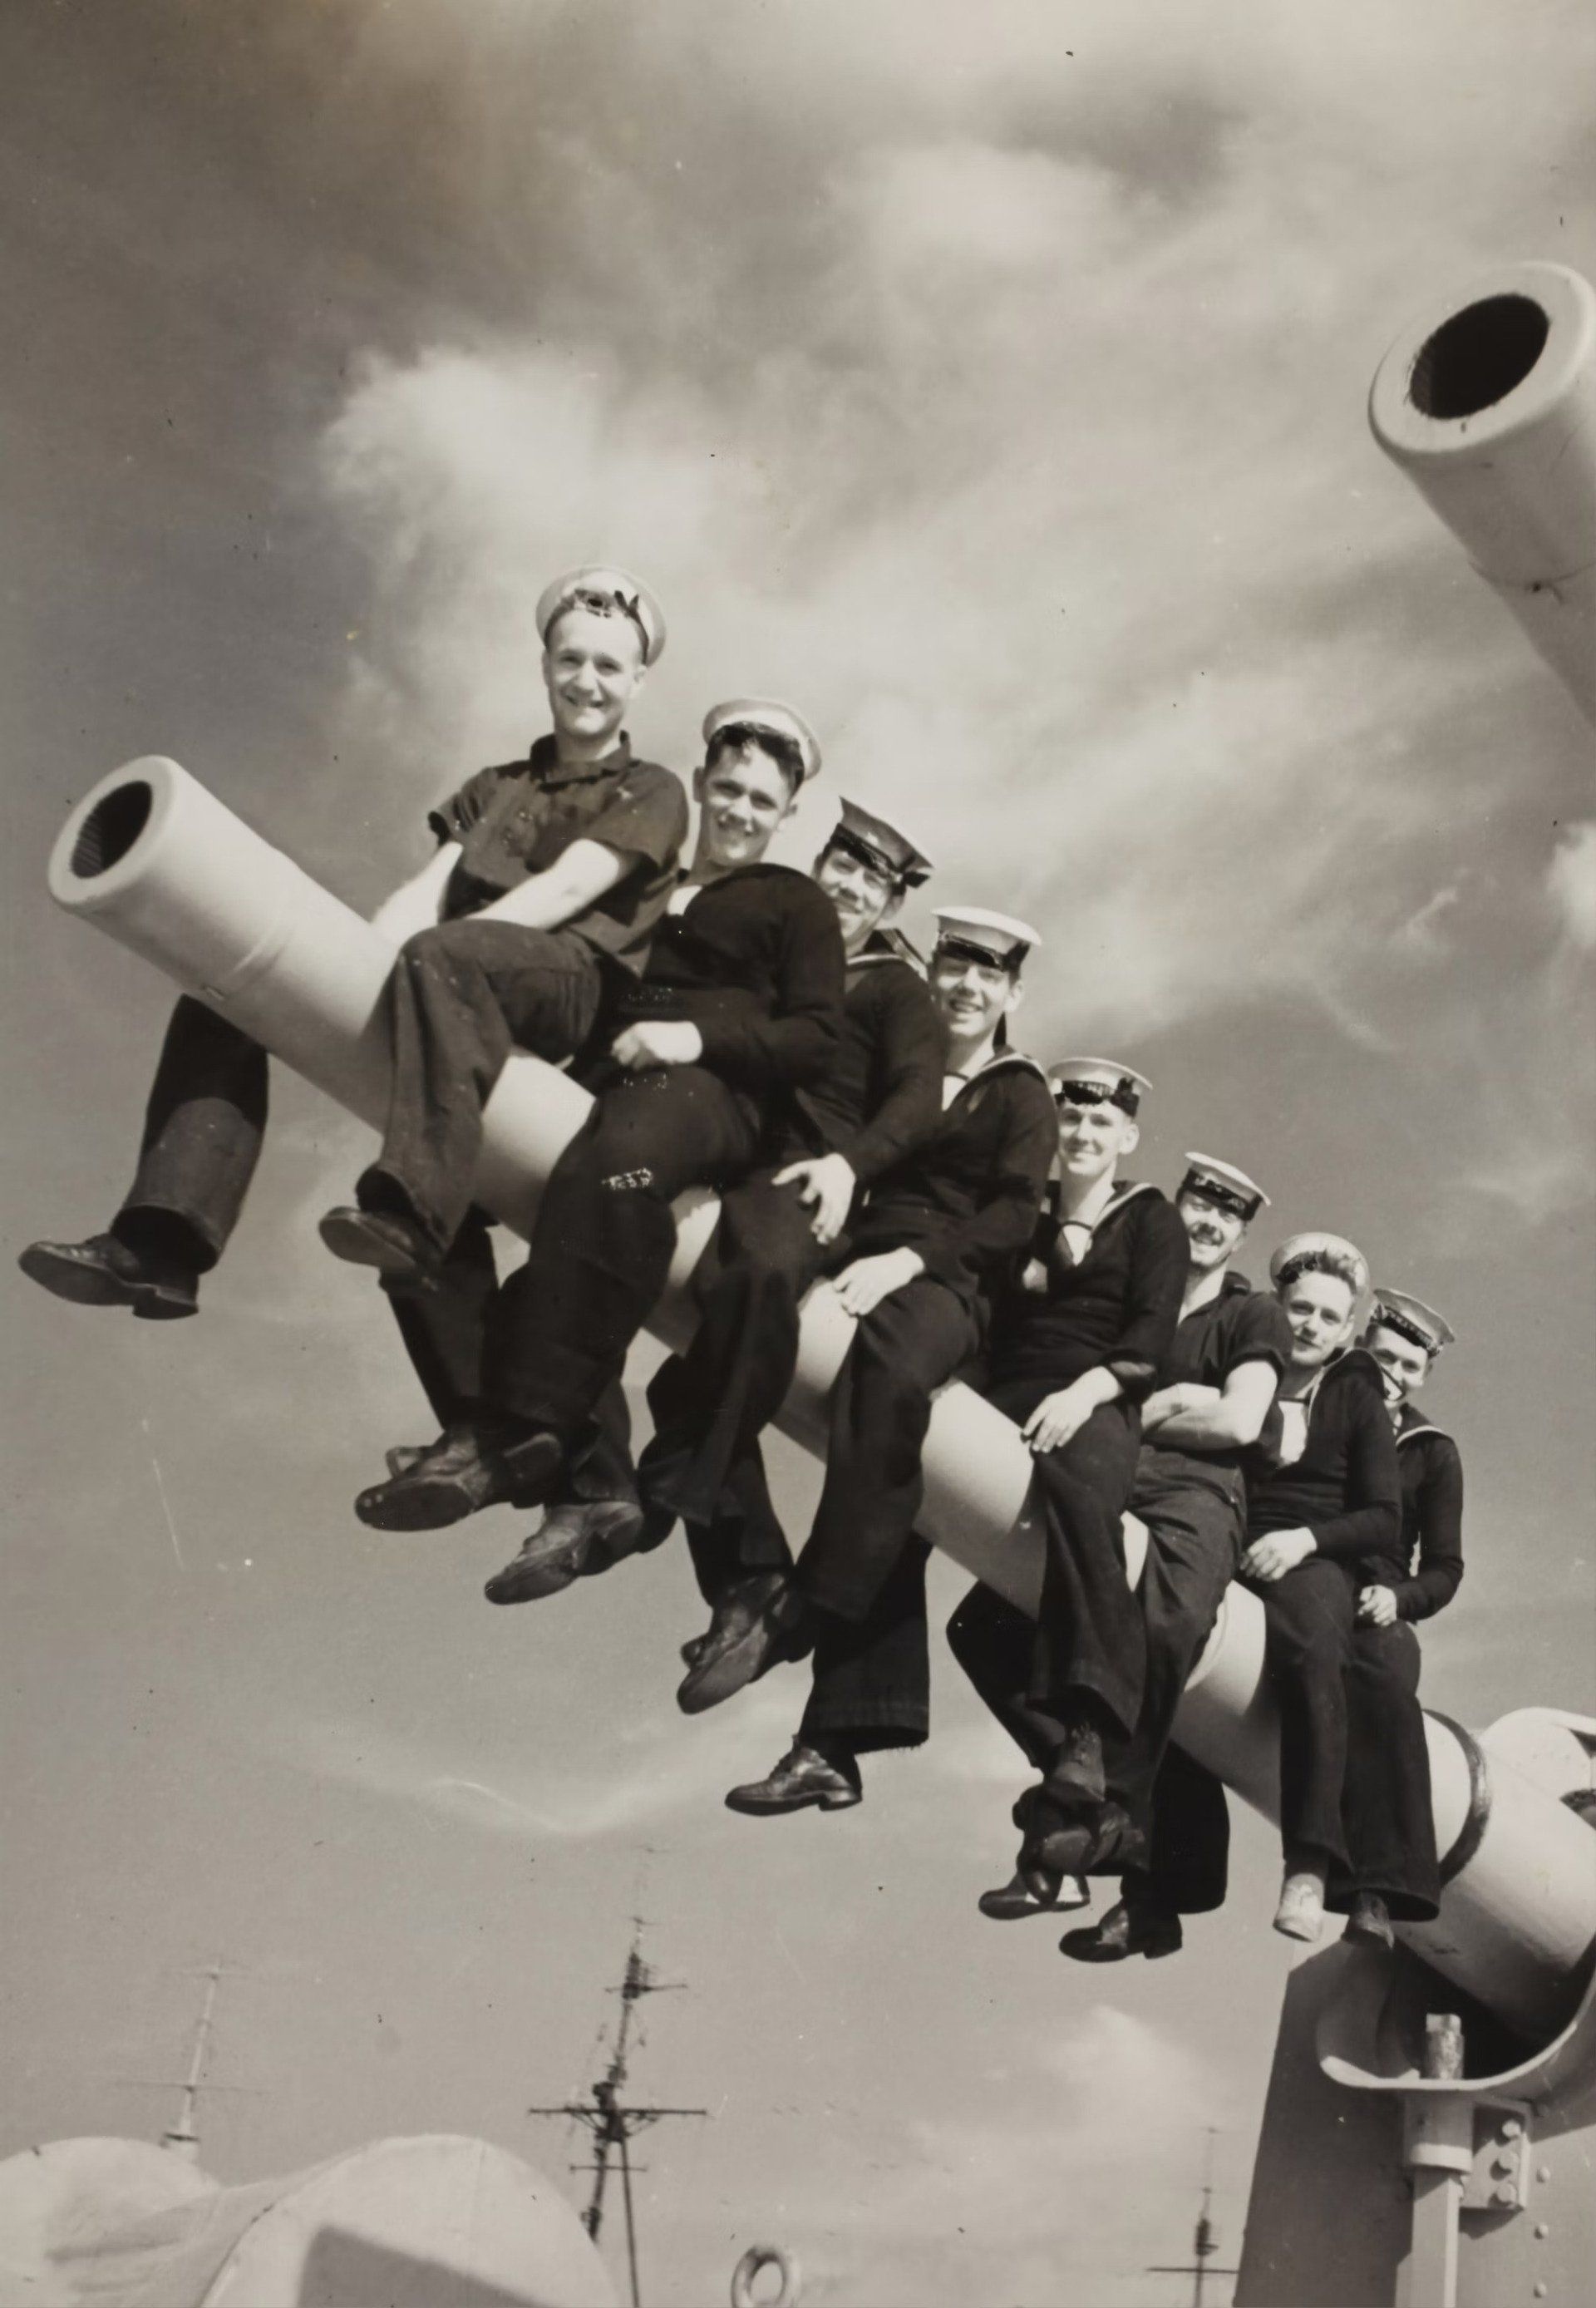 A black and white photo of a group of men sitting on cannons